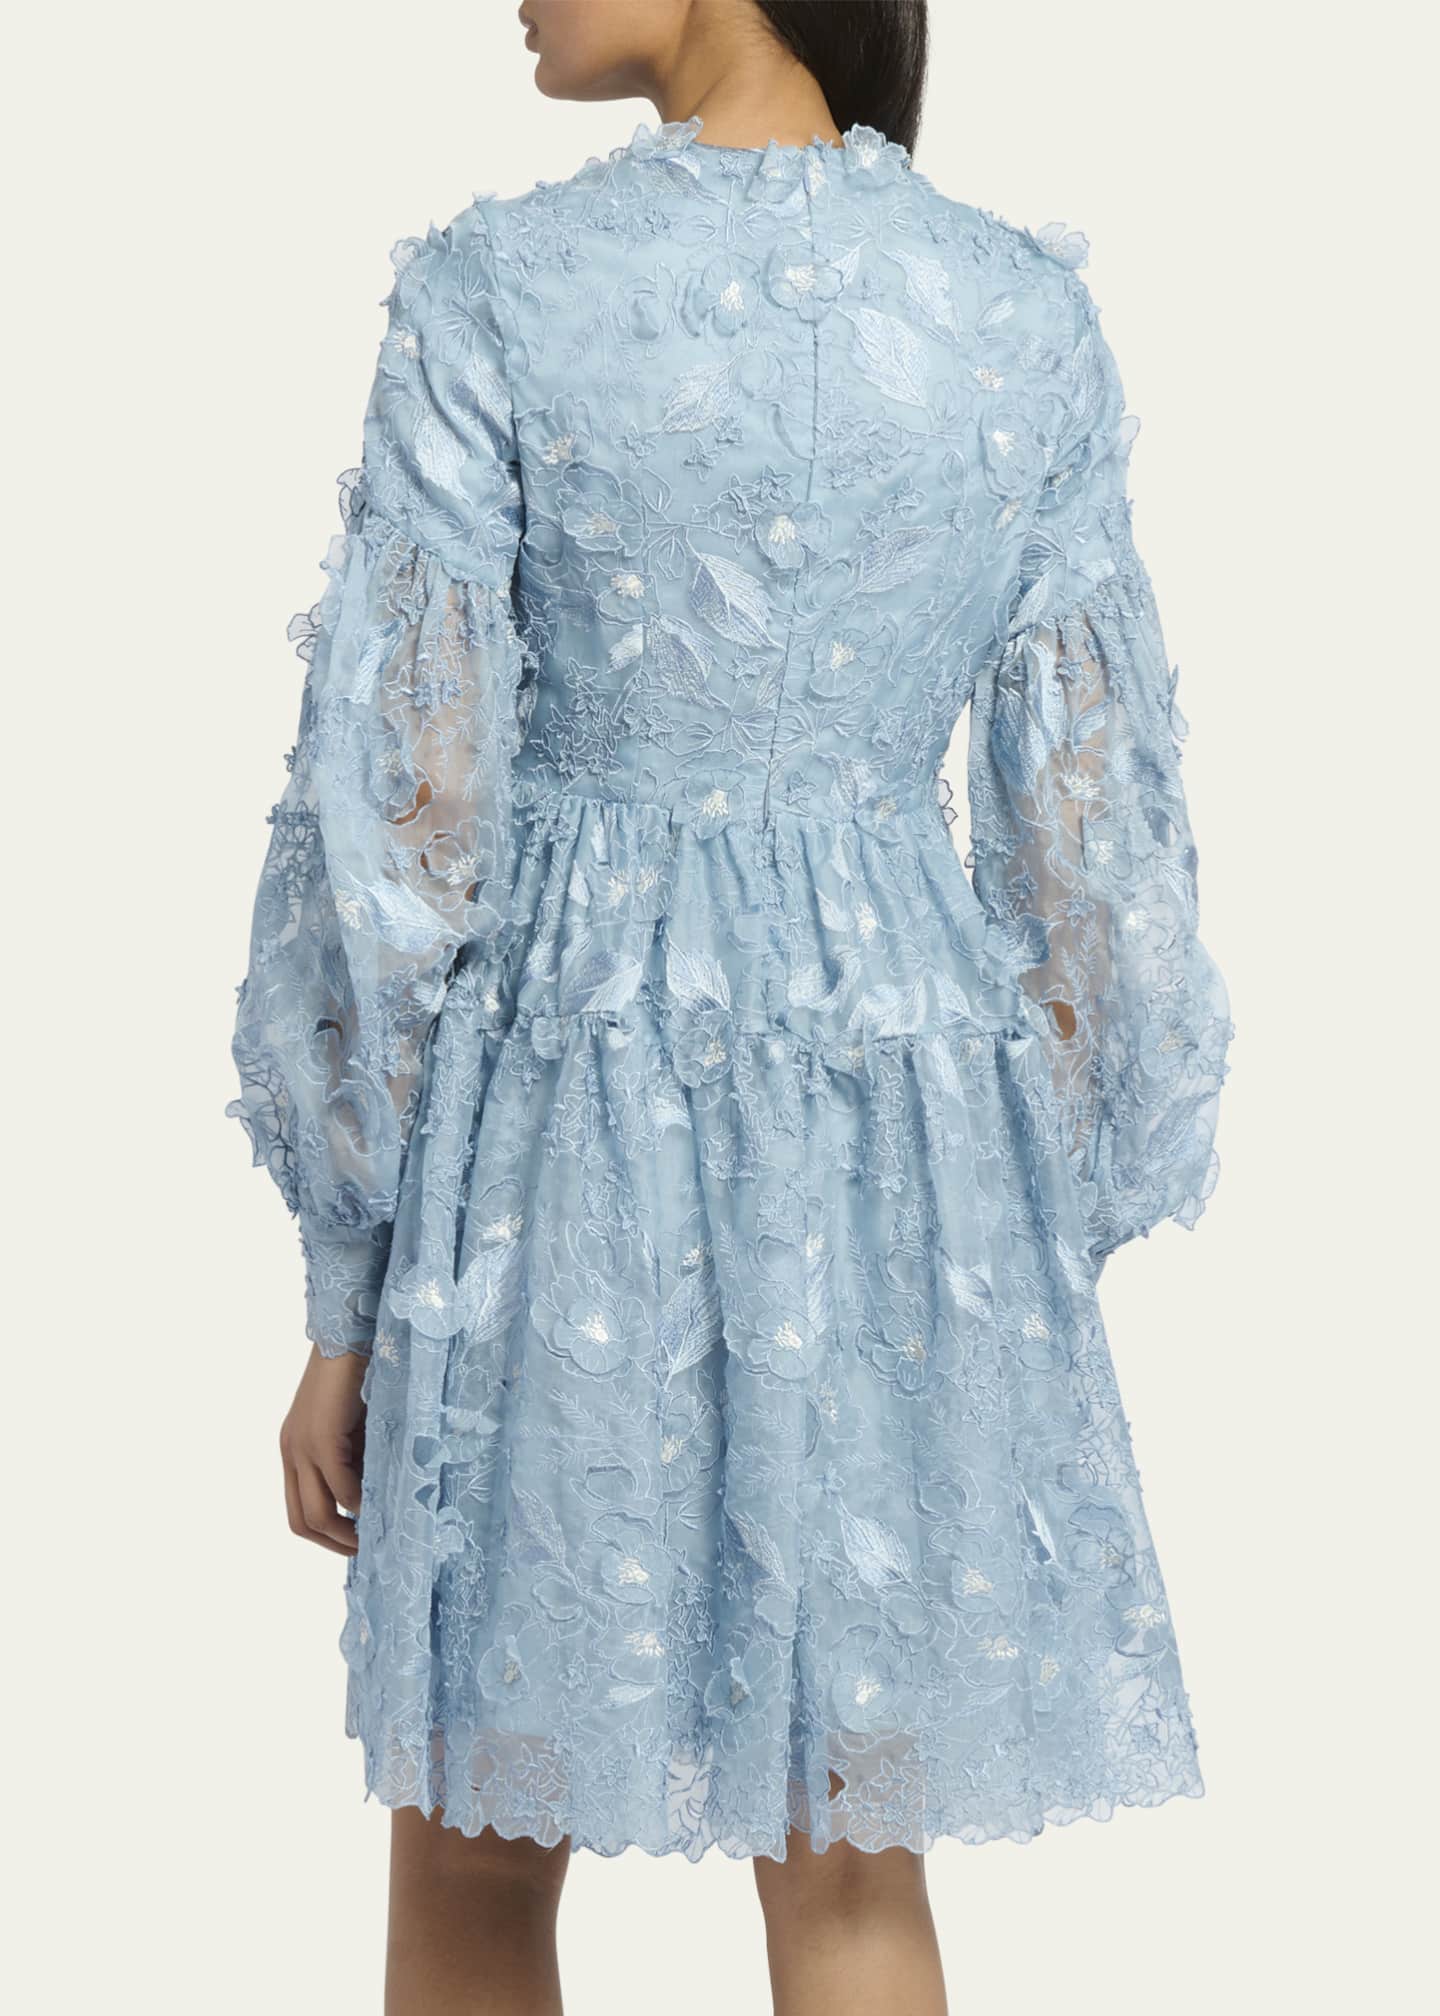 Erdem Floral Embroidered Applique Long-Sleeve Tiered Dress - Bergdorf ...